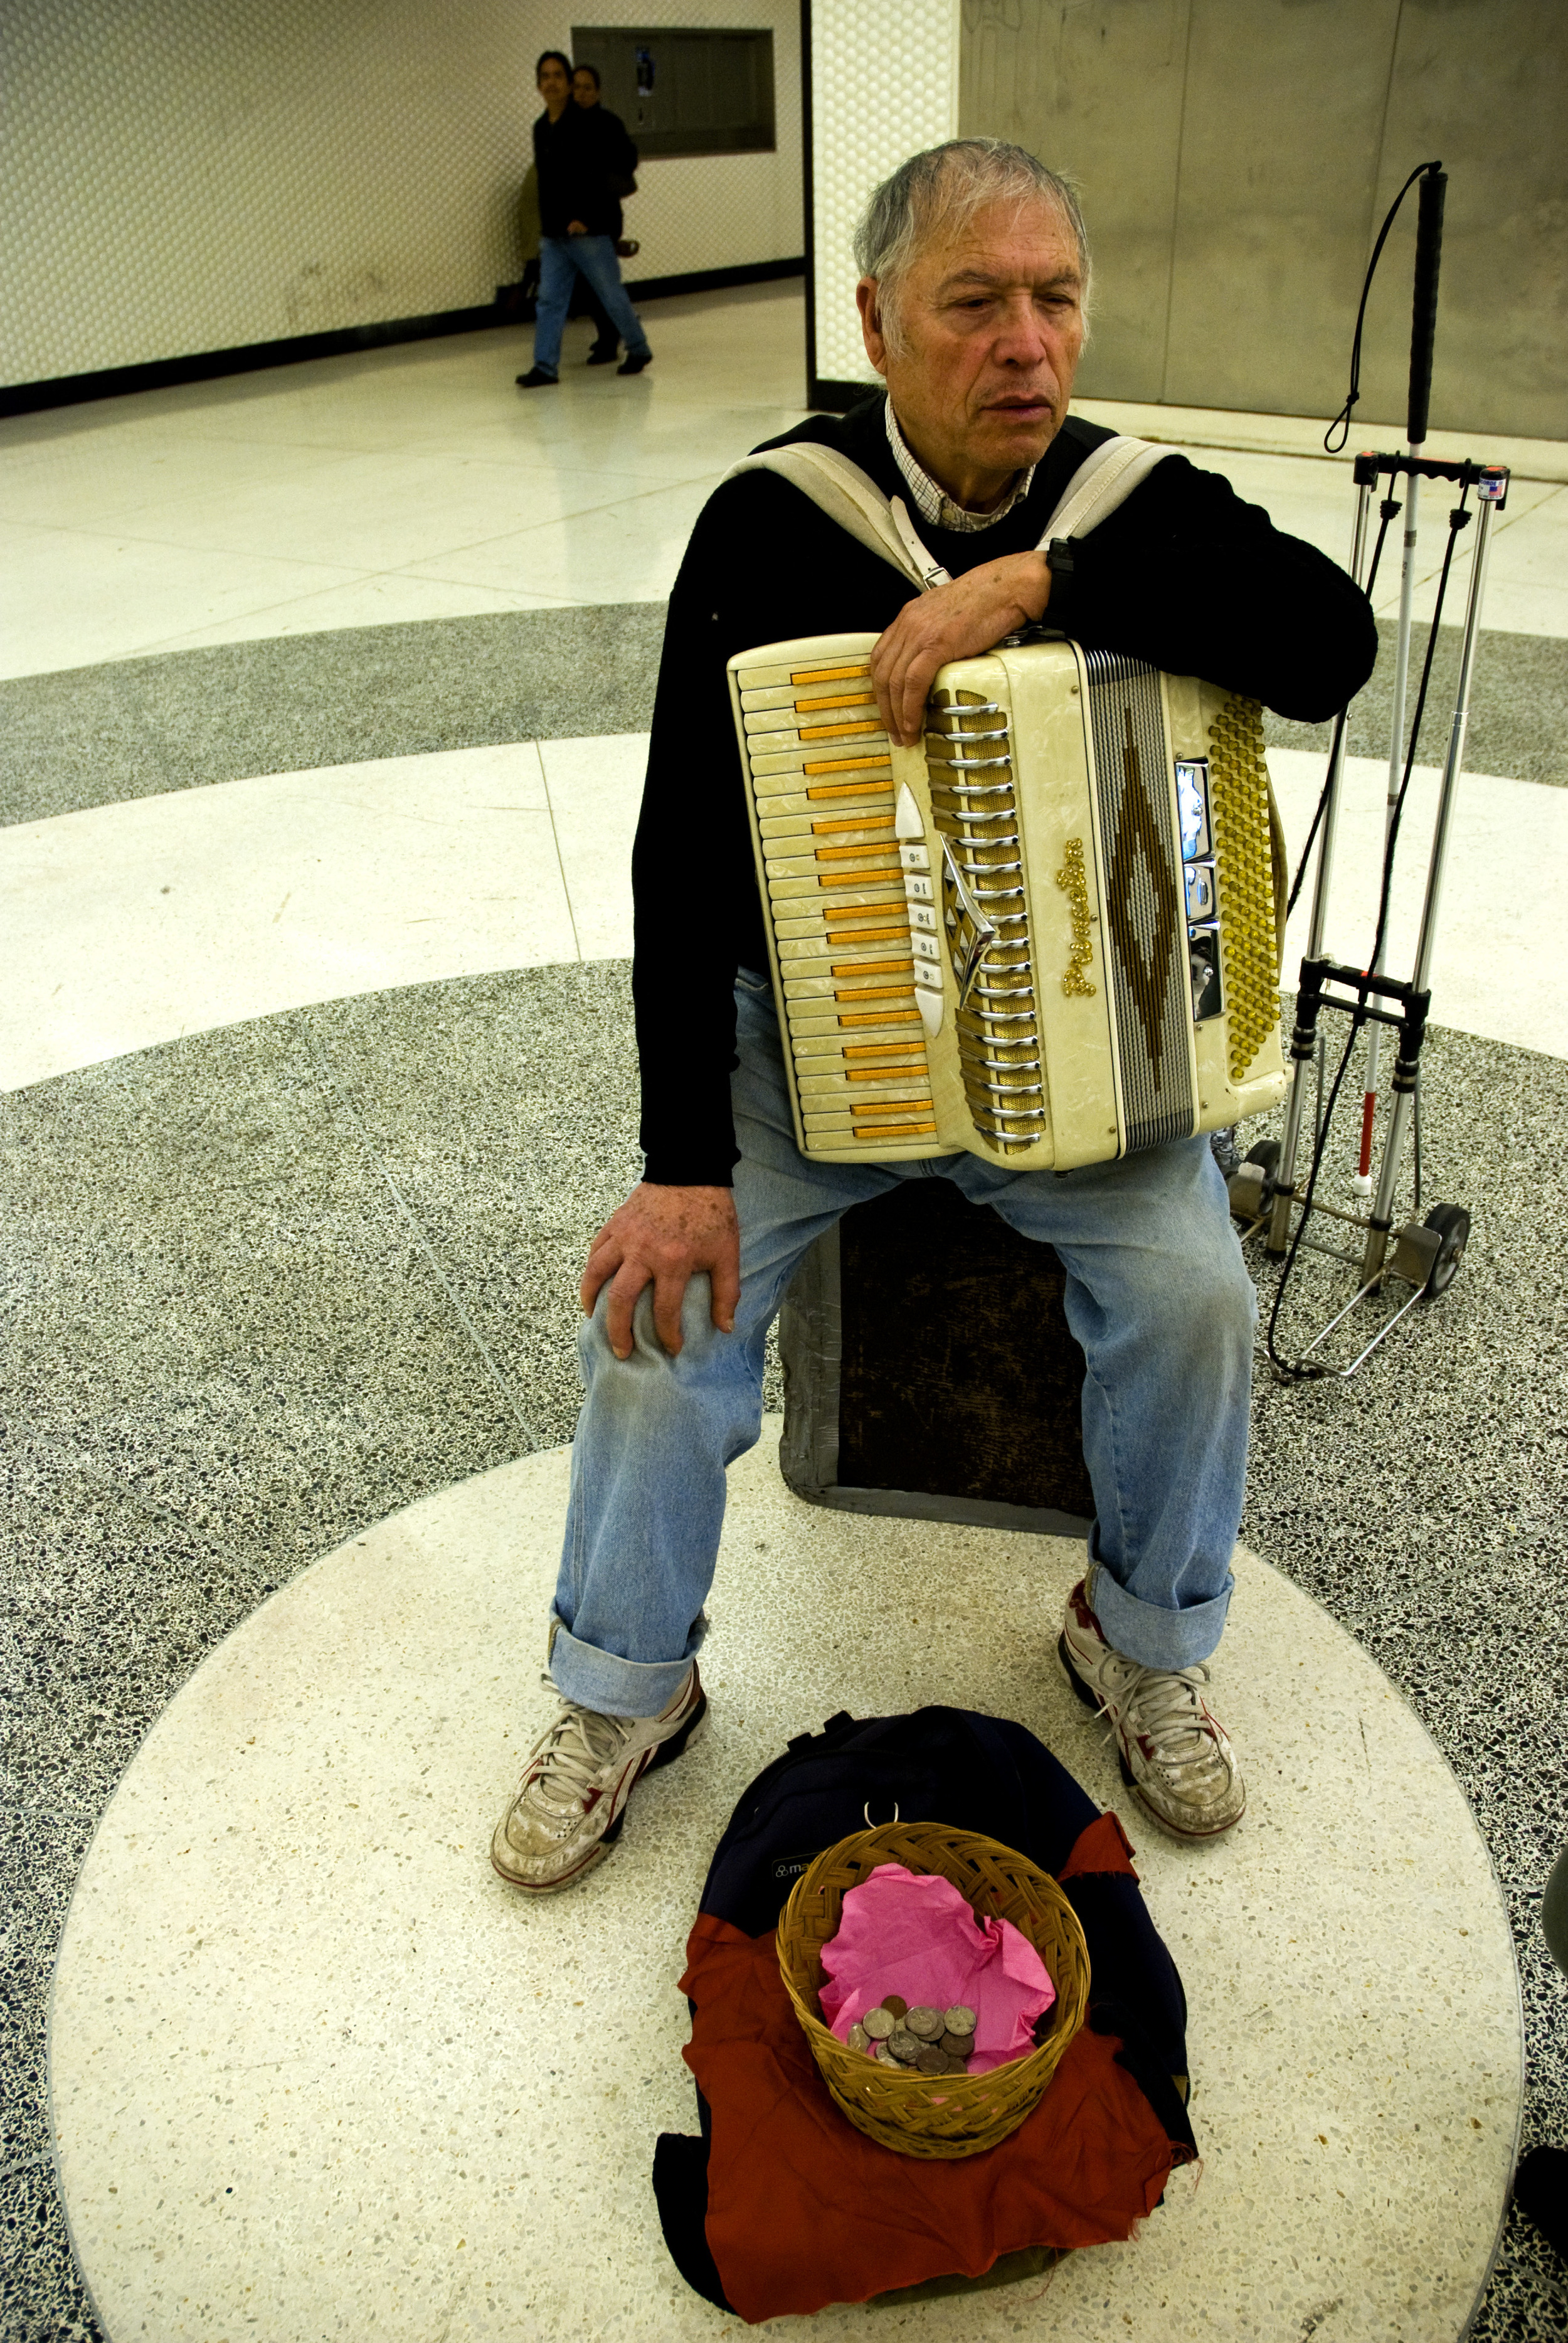  Louis Lopez is blind, but that didn't stop him from learning the accordion. He moved from Chicago to San Francisco in the 70s, and plays to the multitudes of commuters who wind their way through the Powell St. BART station every day. 